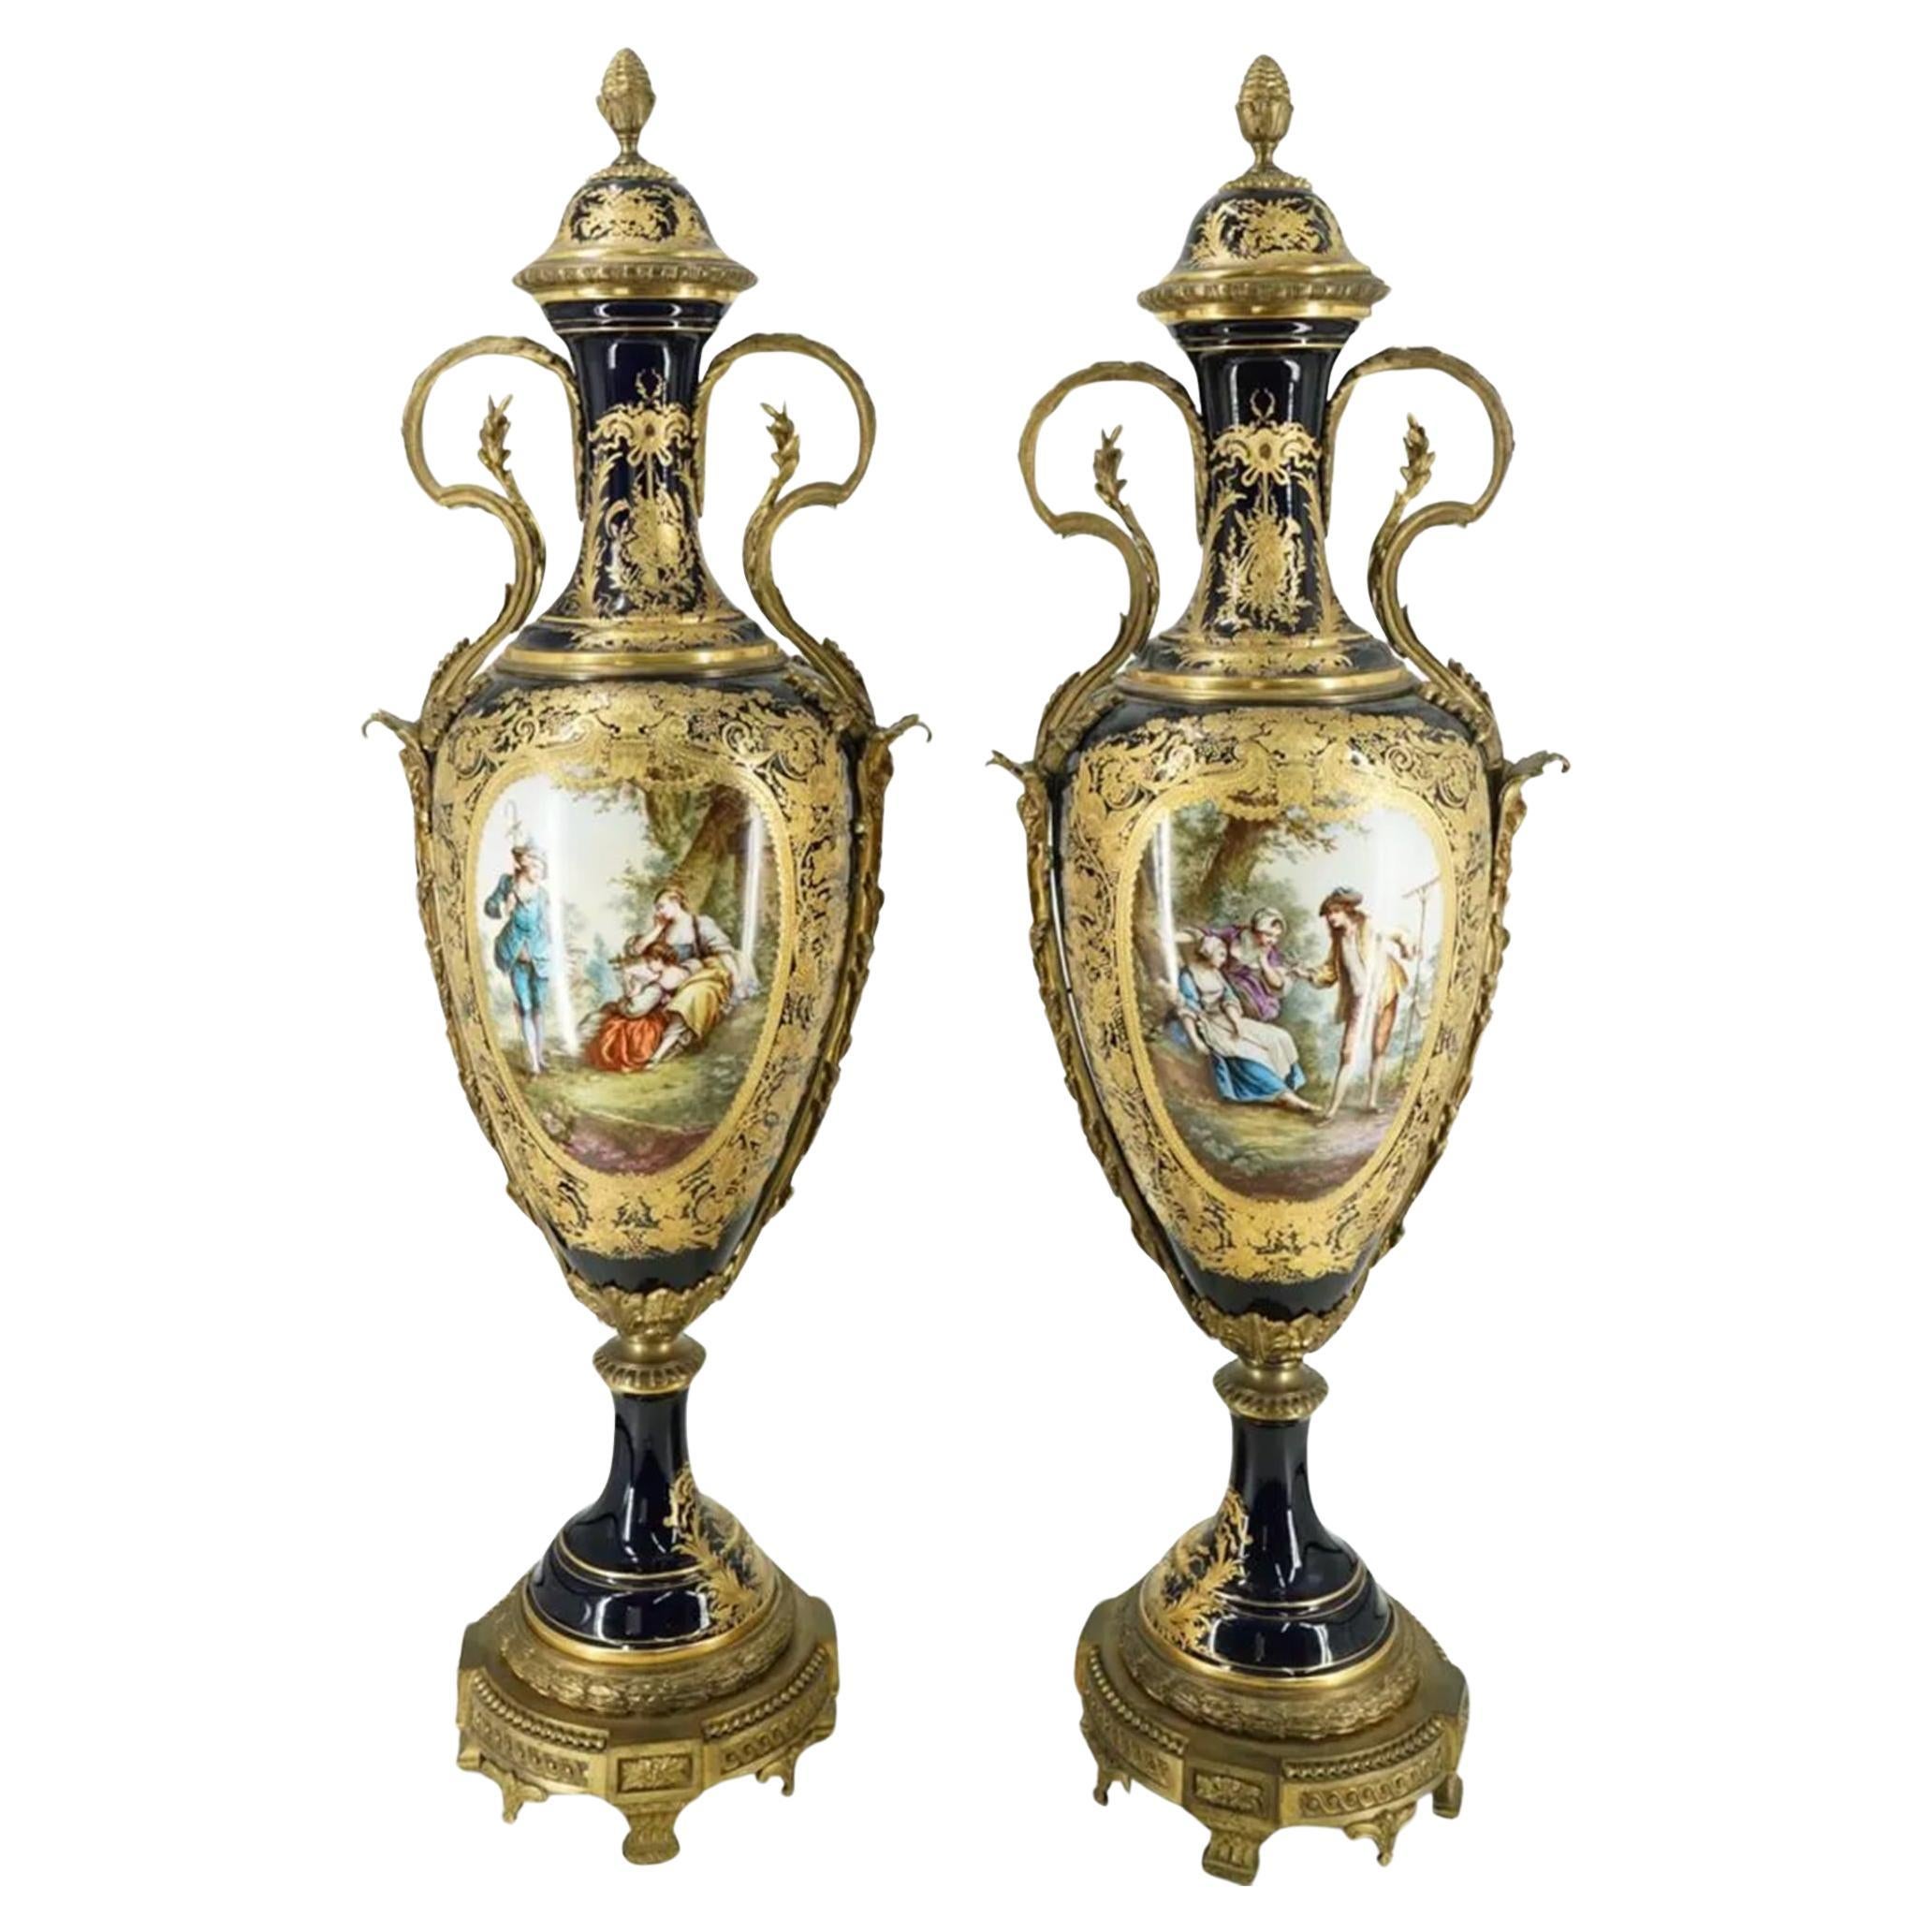 Pair of Large Antique Sevres Porcelain And Bronze Urns